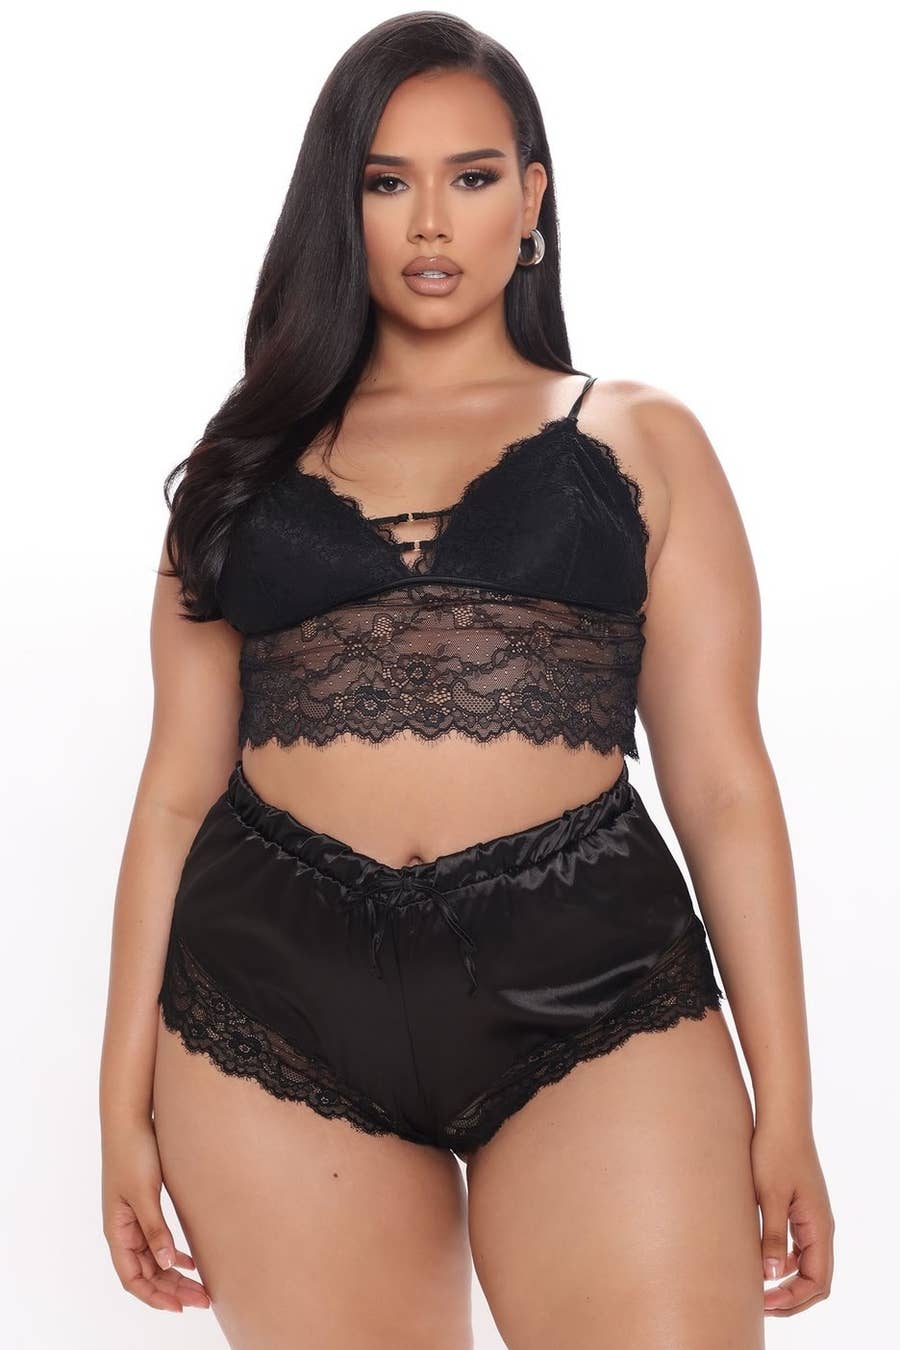 nikkel vitamin nakke 34 Best Plus Size Lingerie Pieces To Spice Things Up